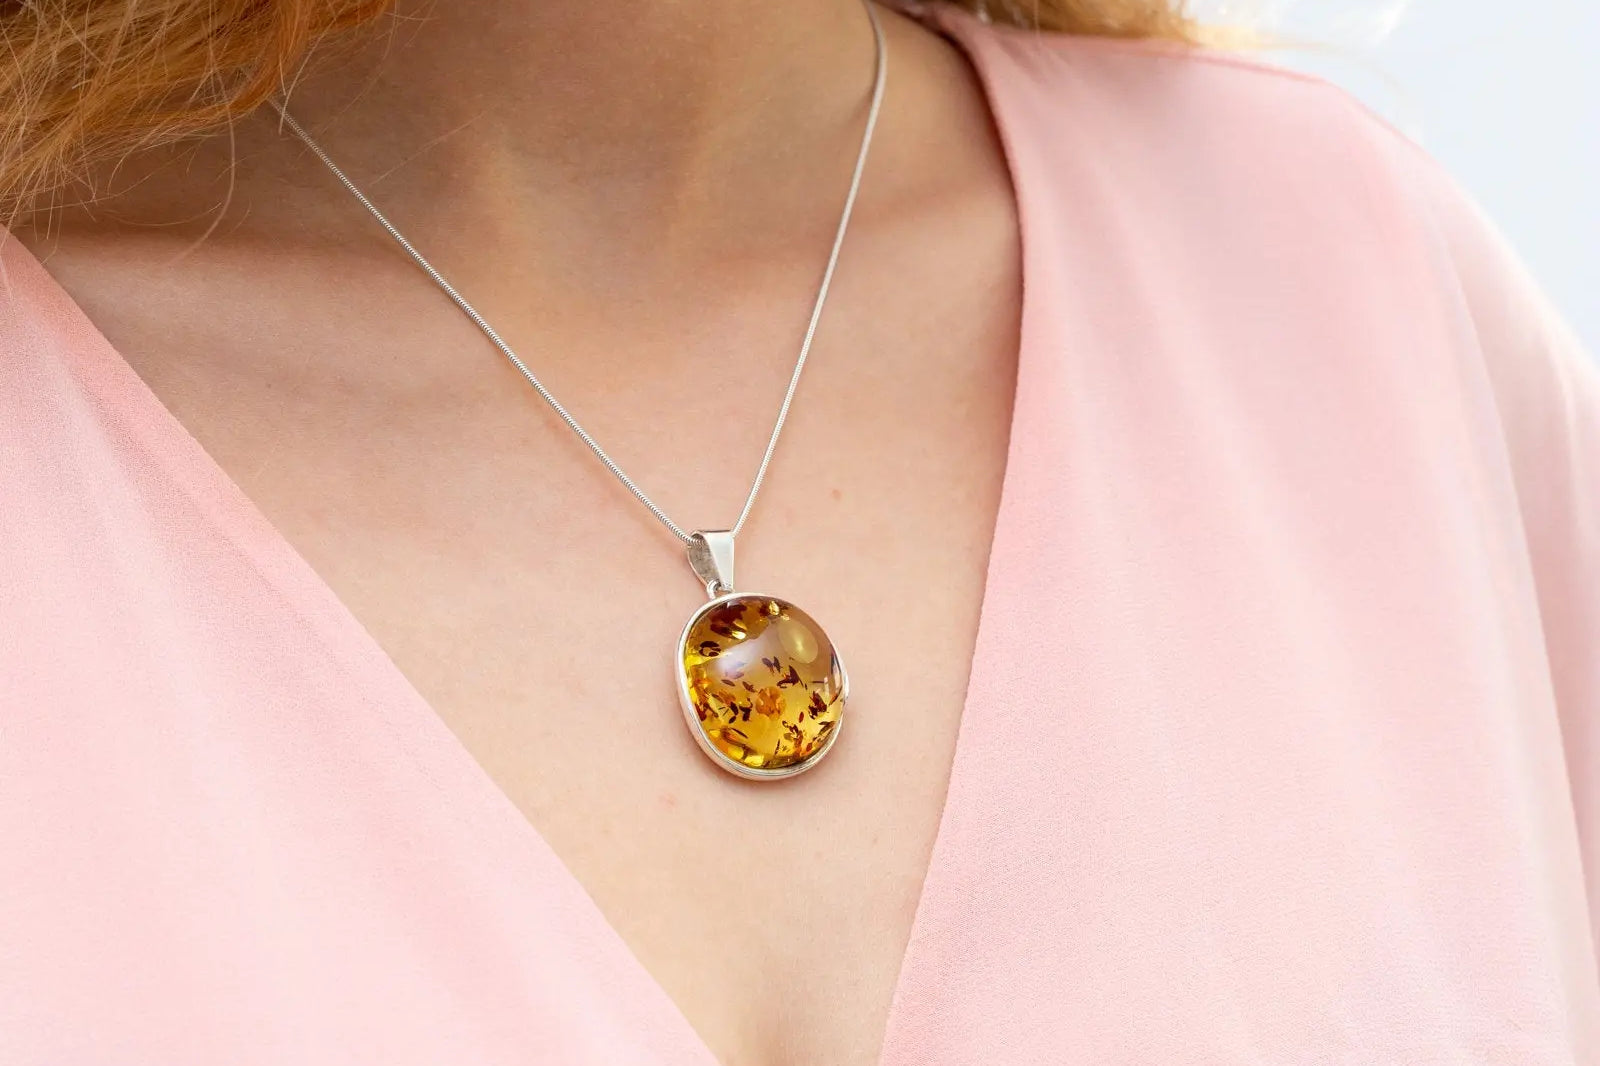 Handmade Speckled Autumn Amber Pendant- Necklaces- Baltic Beauty